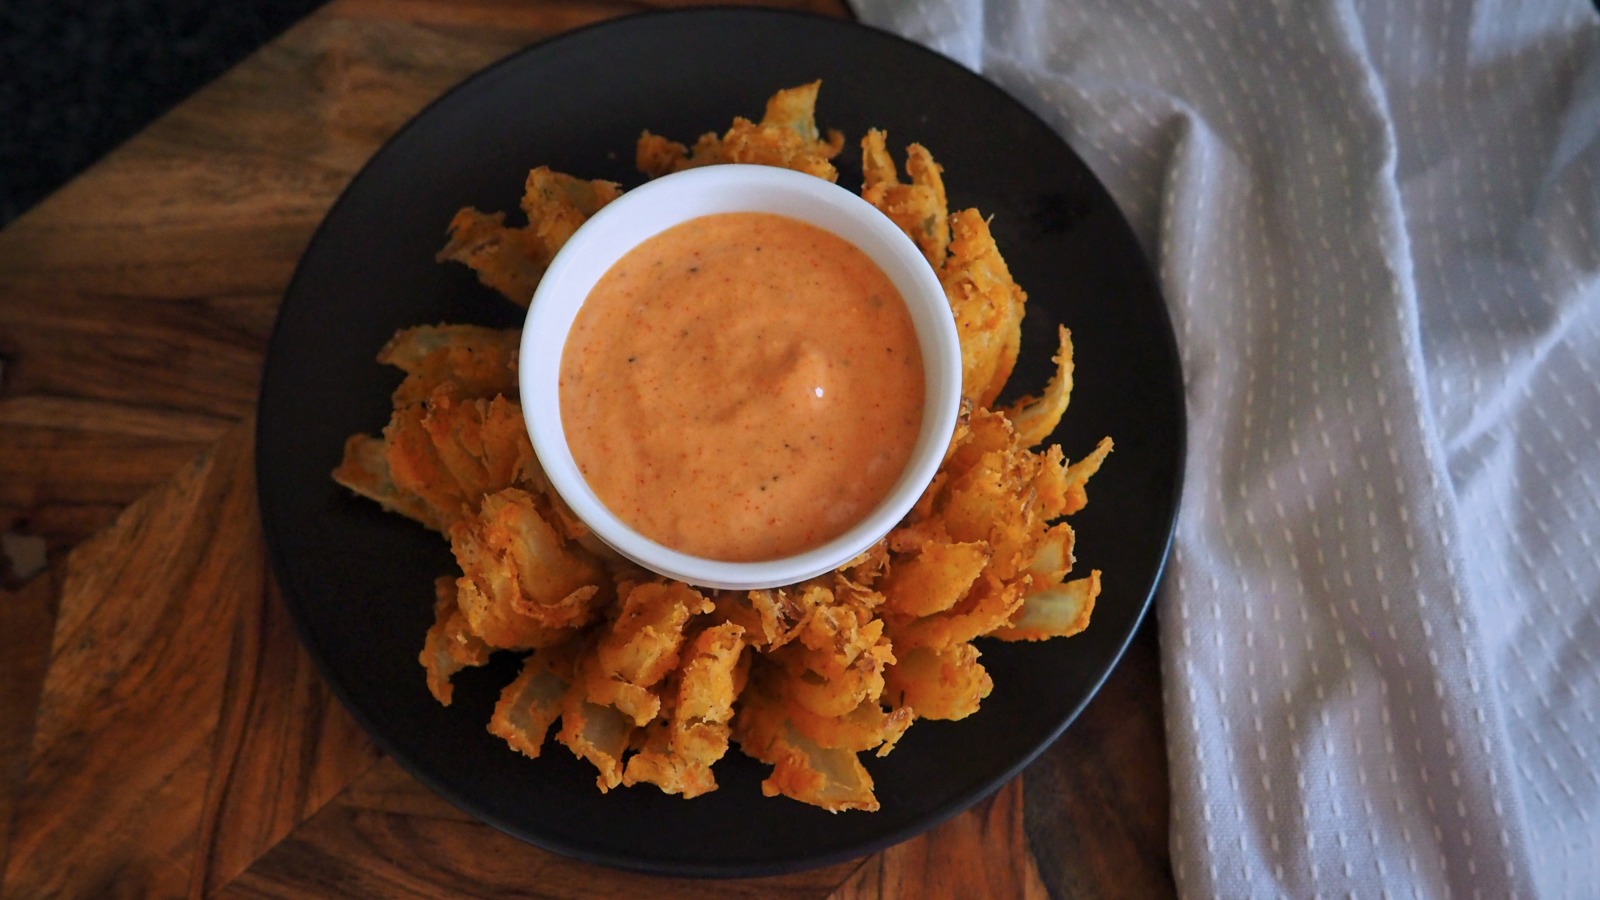 Making Outback Steakhouse Blooming Onion At Home